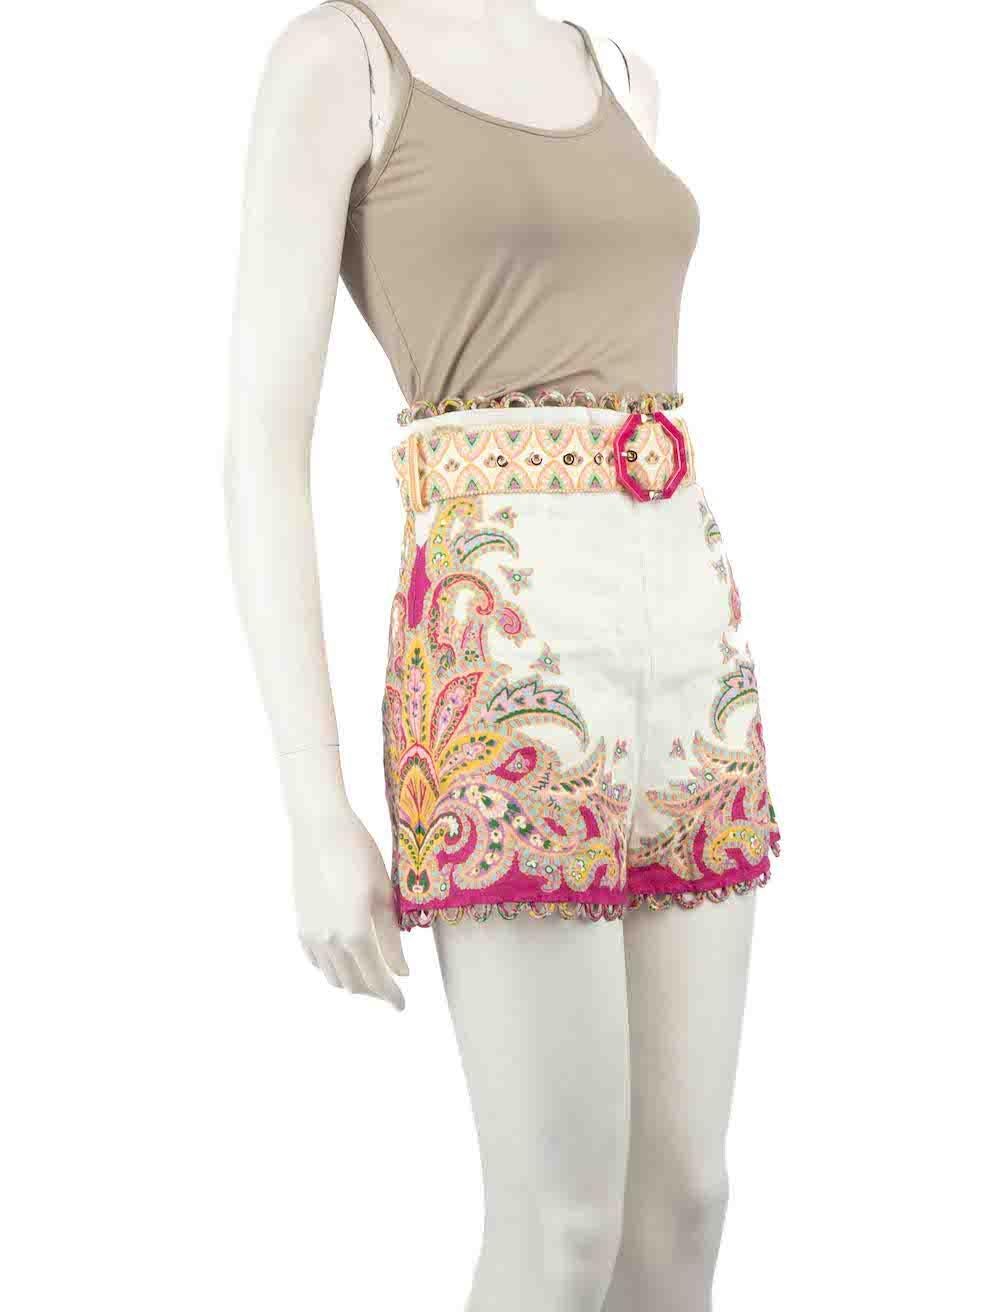 CONDITION is Very good. Minimal wear to shorts is evident. Minimal discoloured mark to rear hip on this used Zimmermann designer resale item.
 
 Details
 Multicolour - white and pink
 Linen
 Shorts
 Belted
 Floral pattern
 Back zip fastening
 Lace